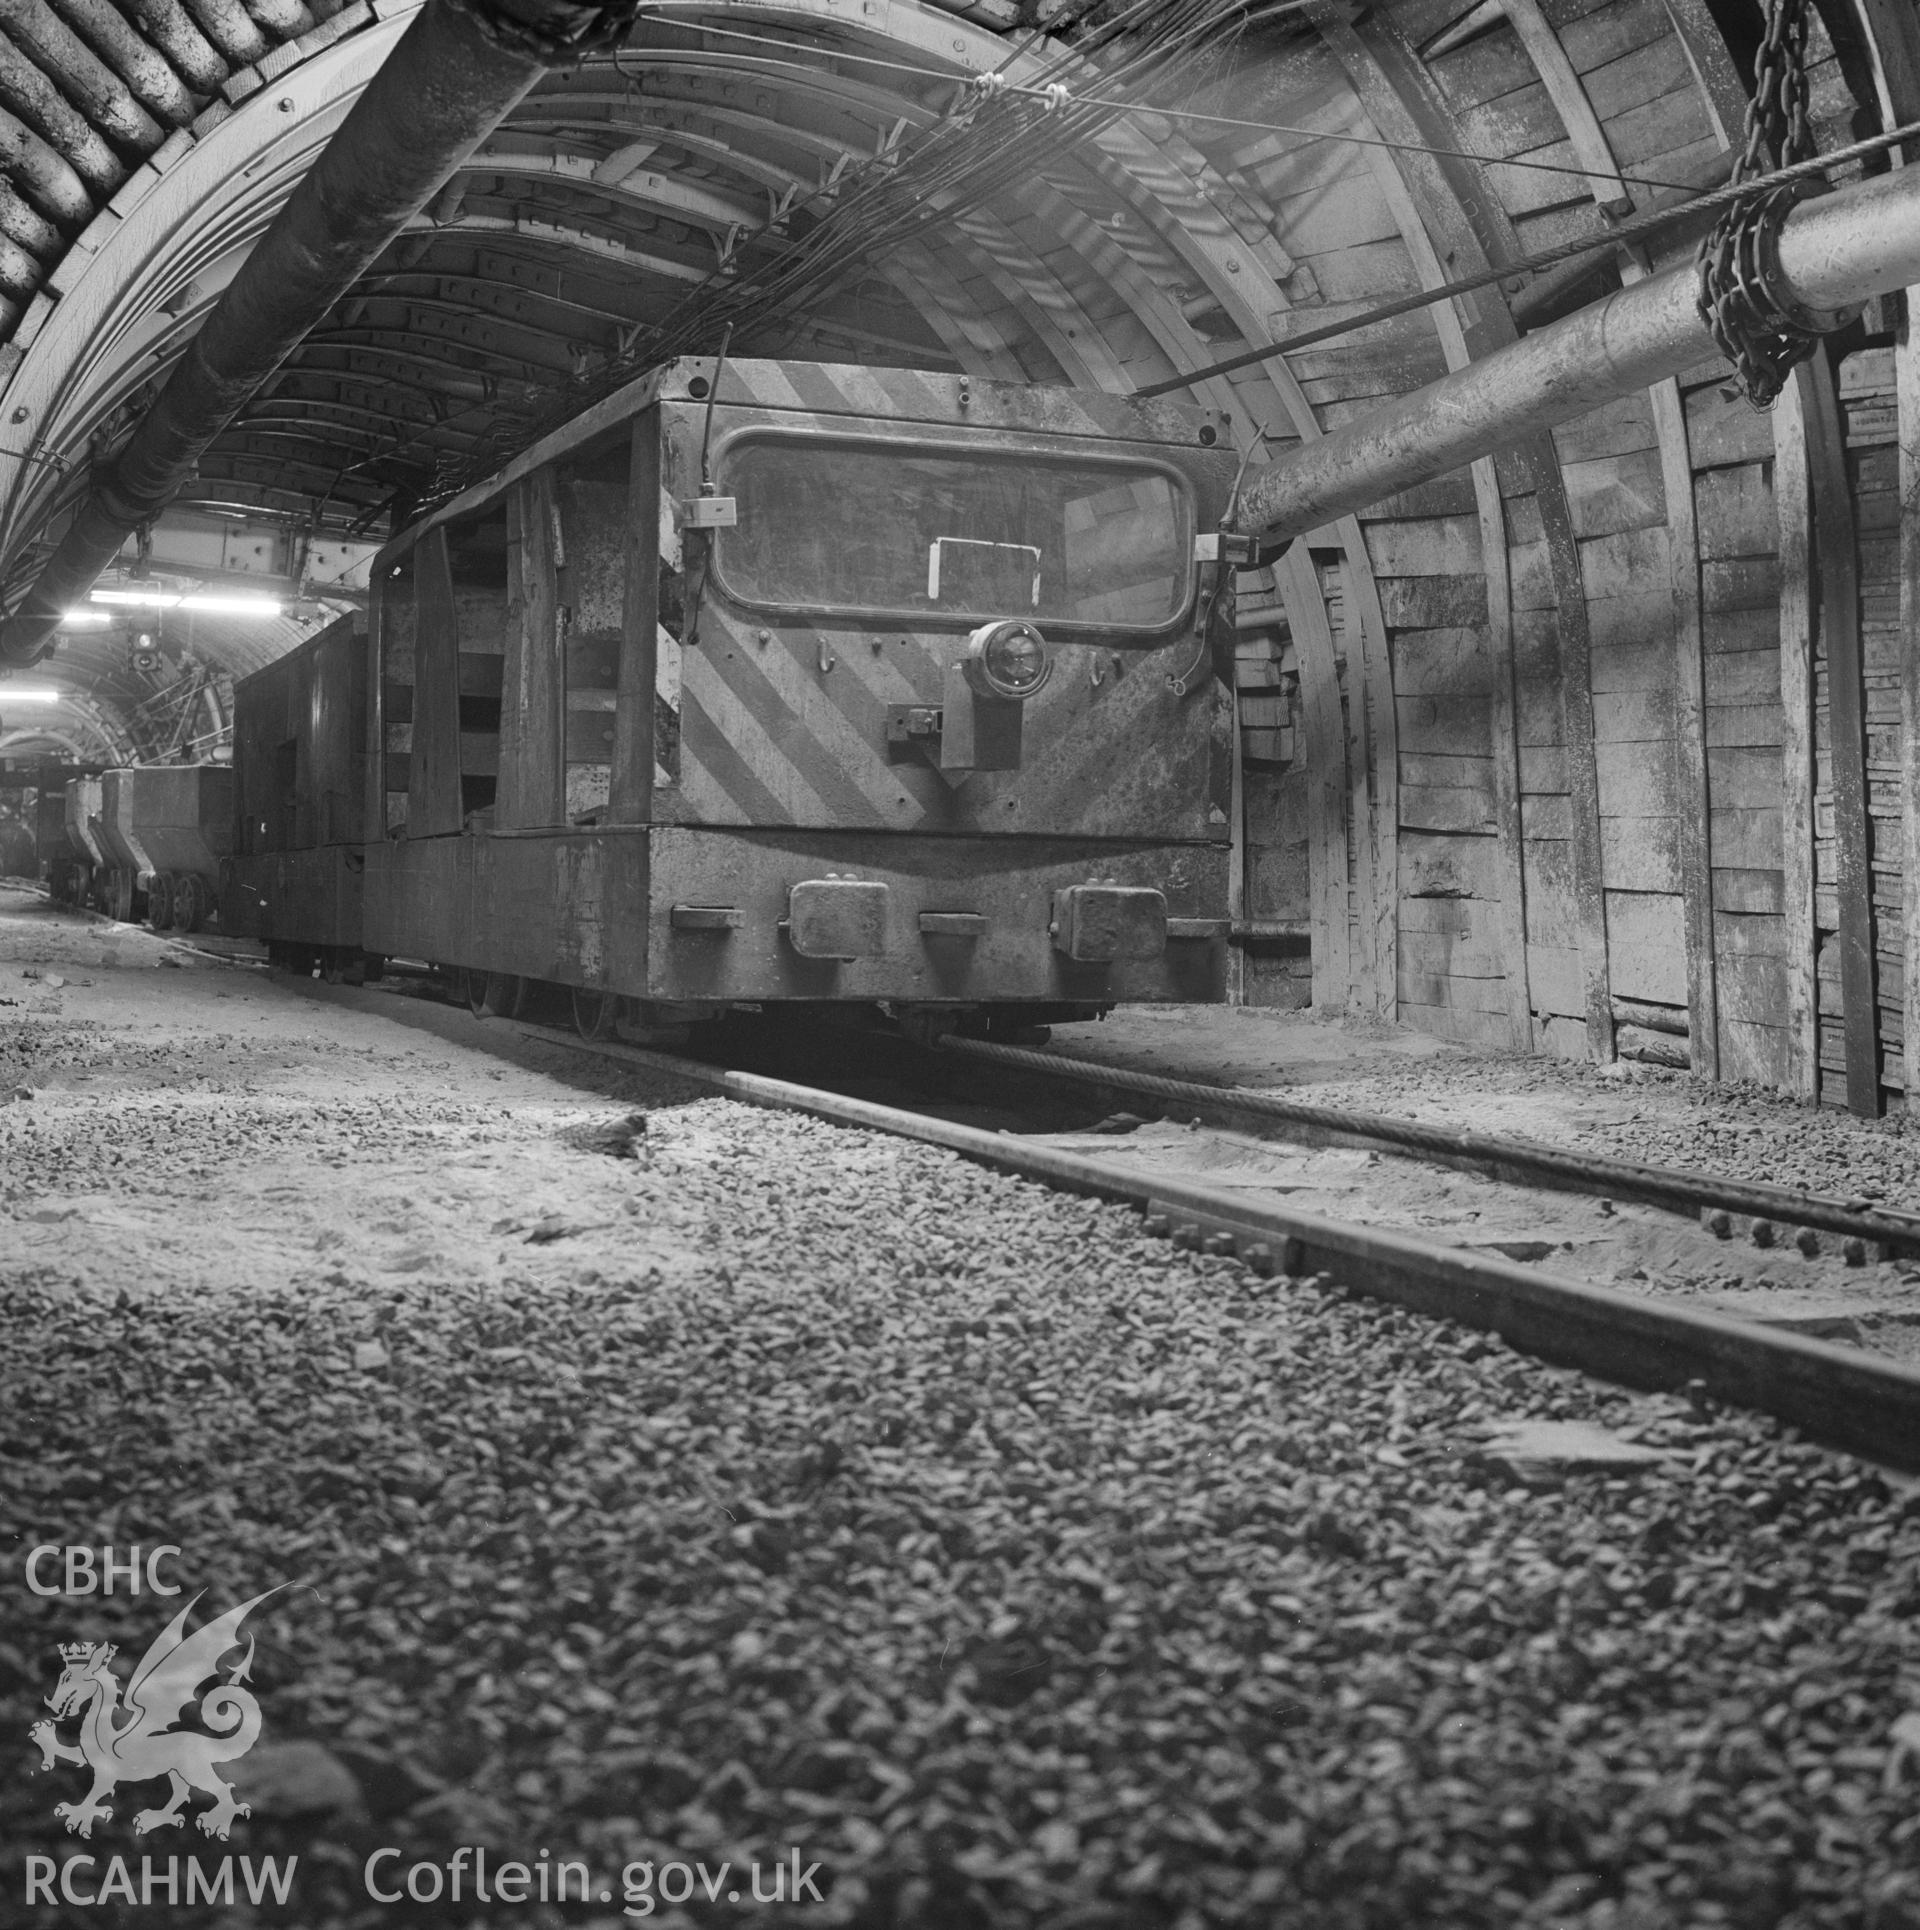 Digital copy of an acetate negative showing rope-hauled underground train at Taff Colliery, from the John Cornwell Collection.